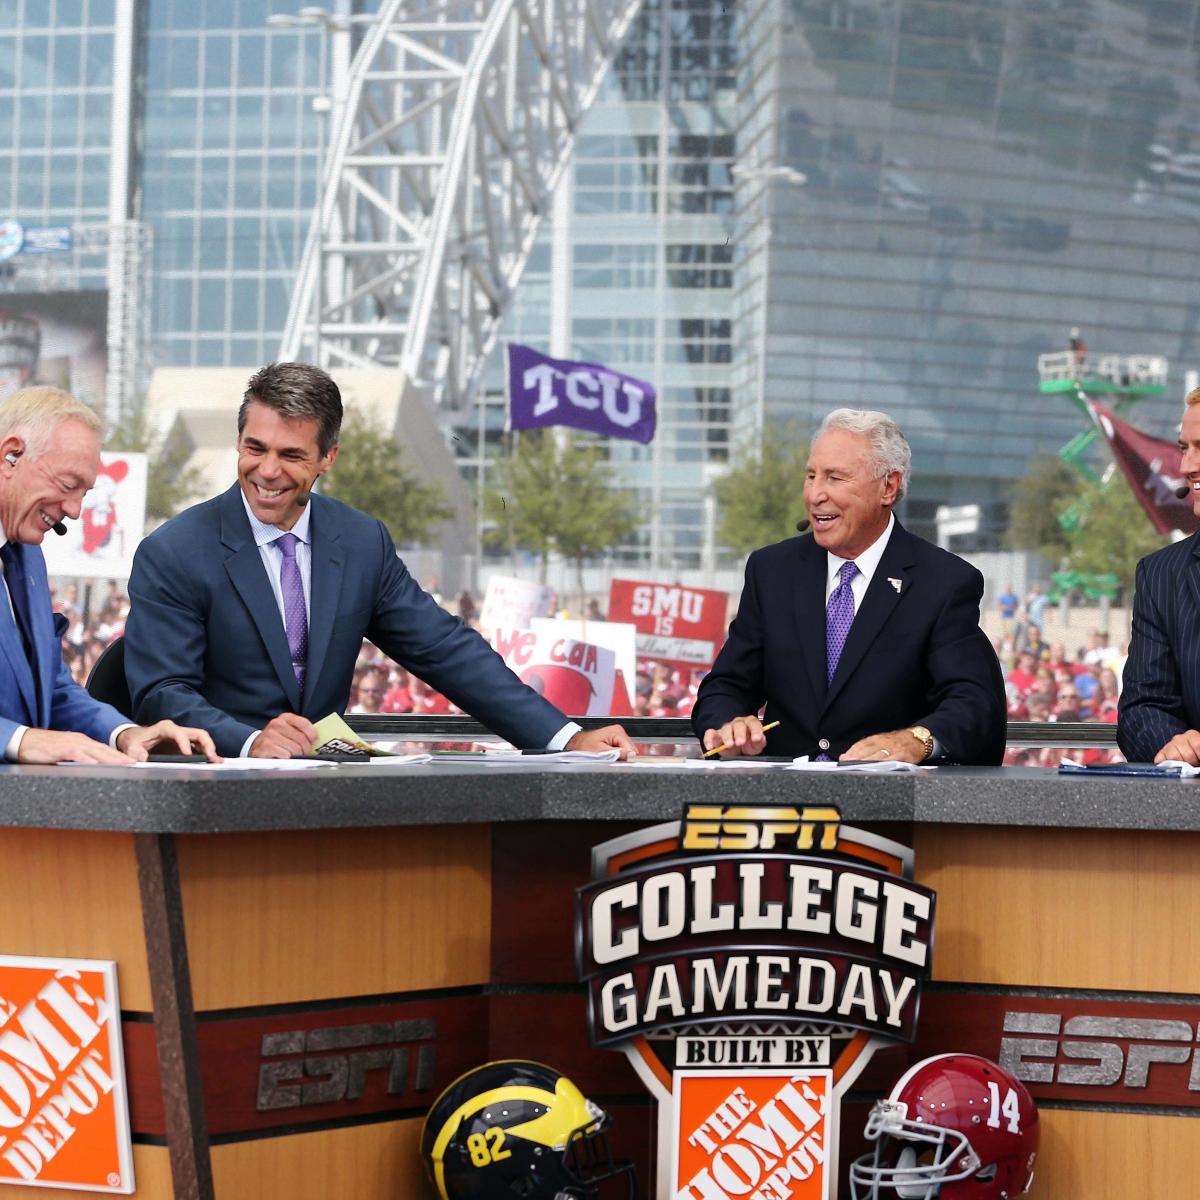 College Gameday 2012 Schedule Previewing the Show's Top Destinations